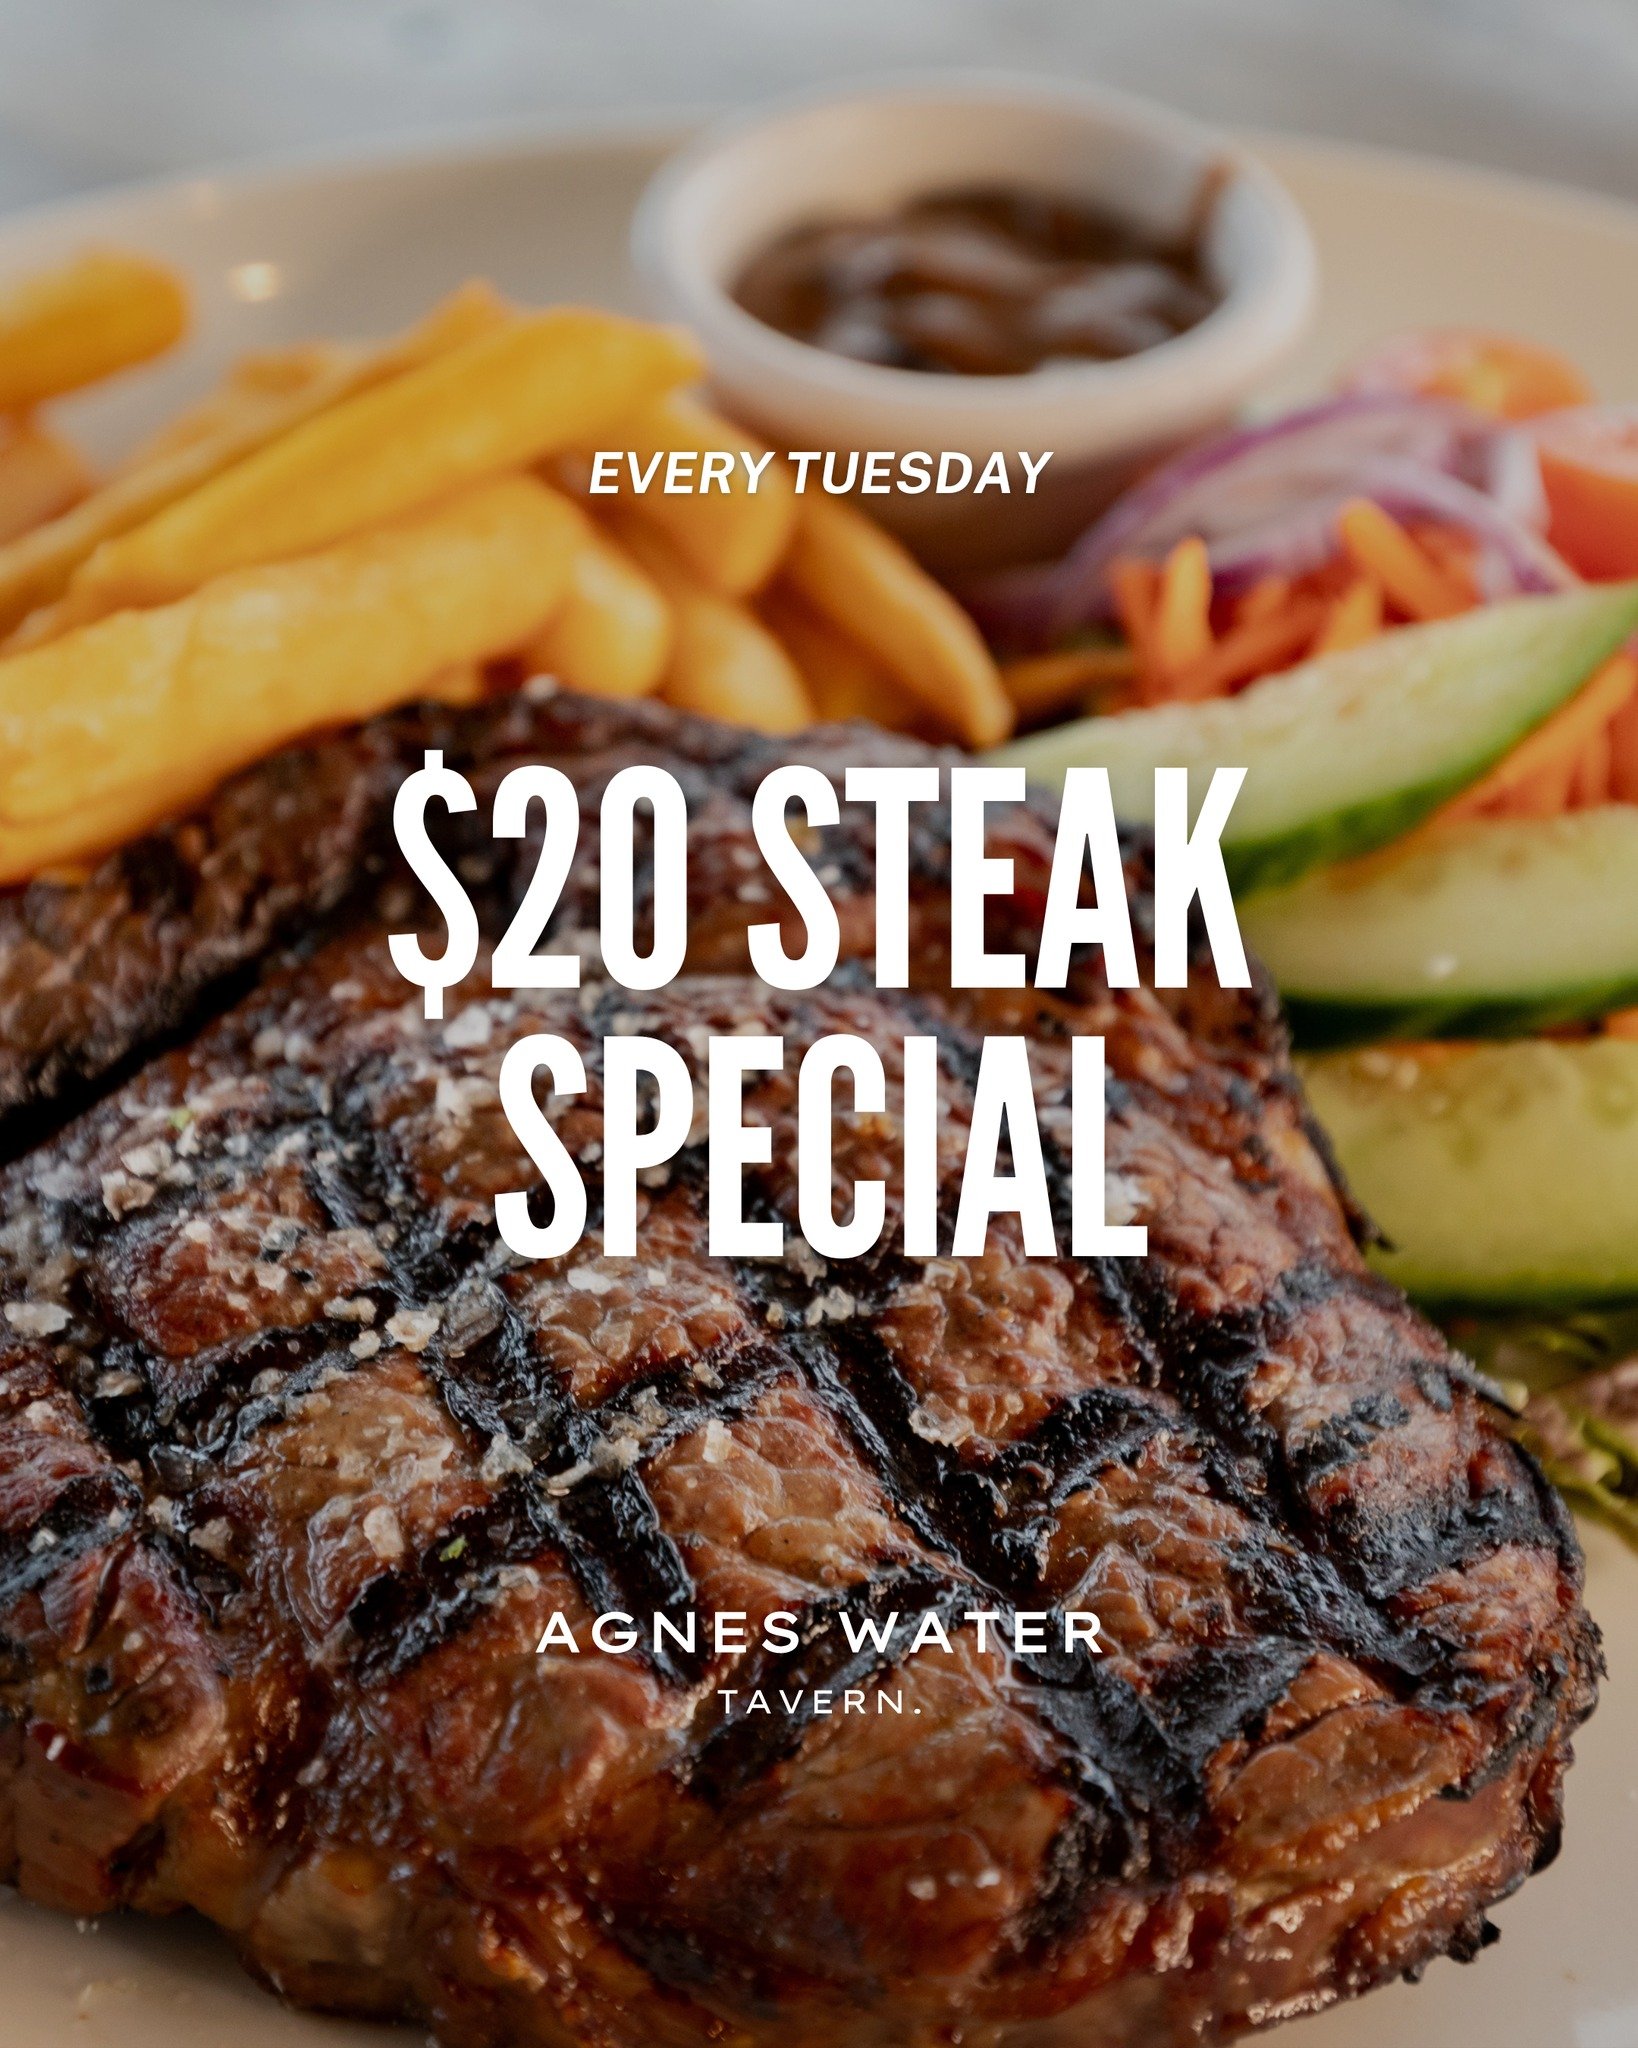 🥩 𝗧𝘂𝗲𝘀𝗱𝗮𝘆 𝗦𝘁𝗲𝗮𝗸 𝗦𝗽𝗲𝗰𝗶𝗮𝗹 𝗶𝘀 𝗕𝗮𝗰𝗸! 🥩

Our popular $𝟐𝟎 𝐒𝐭𝐞𝐚𝐤 𝐒𝐩𝐞𝐜𝐢𝐚𝐥 returns this Tuesday! 

Enjoy a juicy 250g Rump Steak with chips, salad, and your choice of sauce for just $20.

📅 Available every Tuesday unt